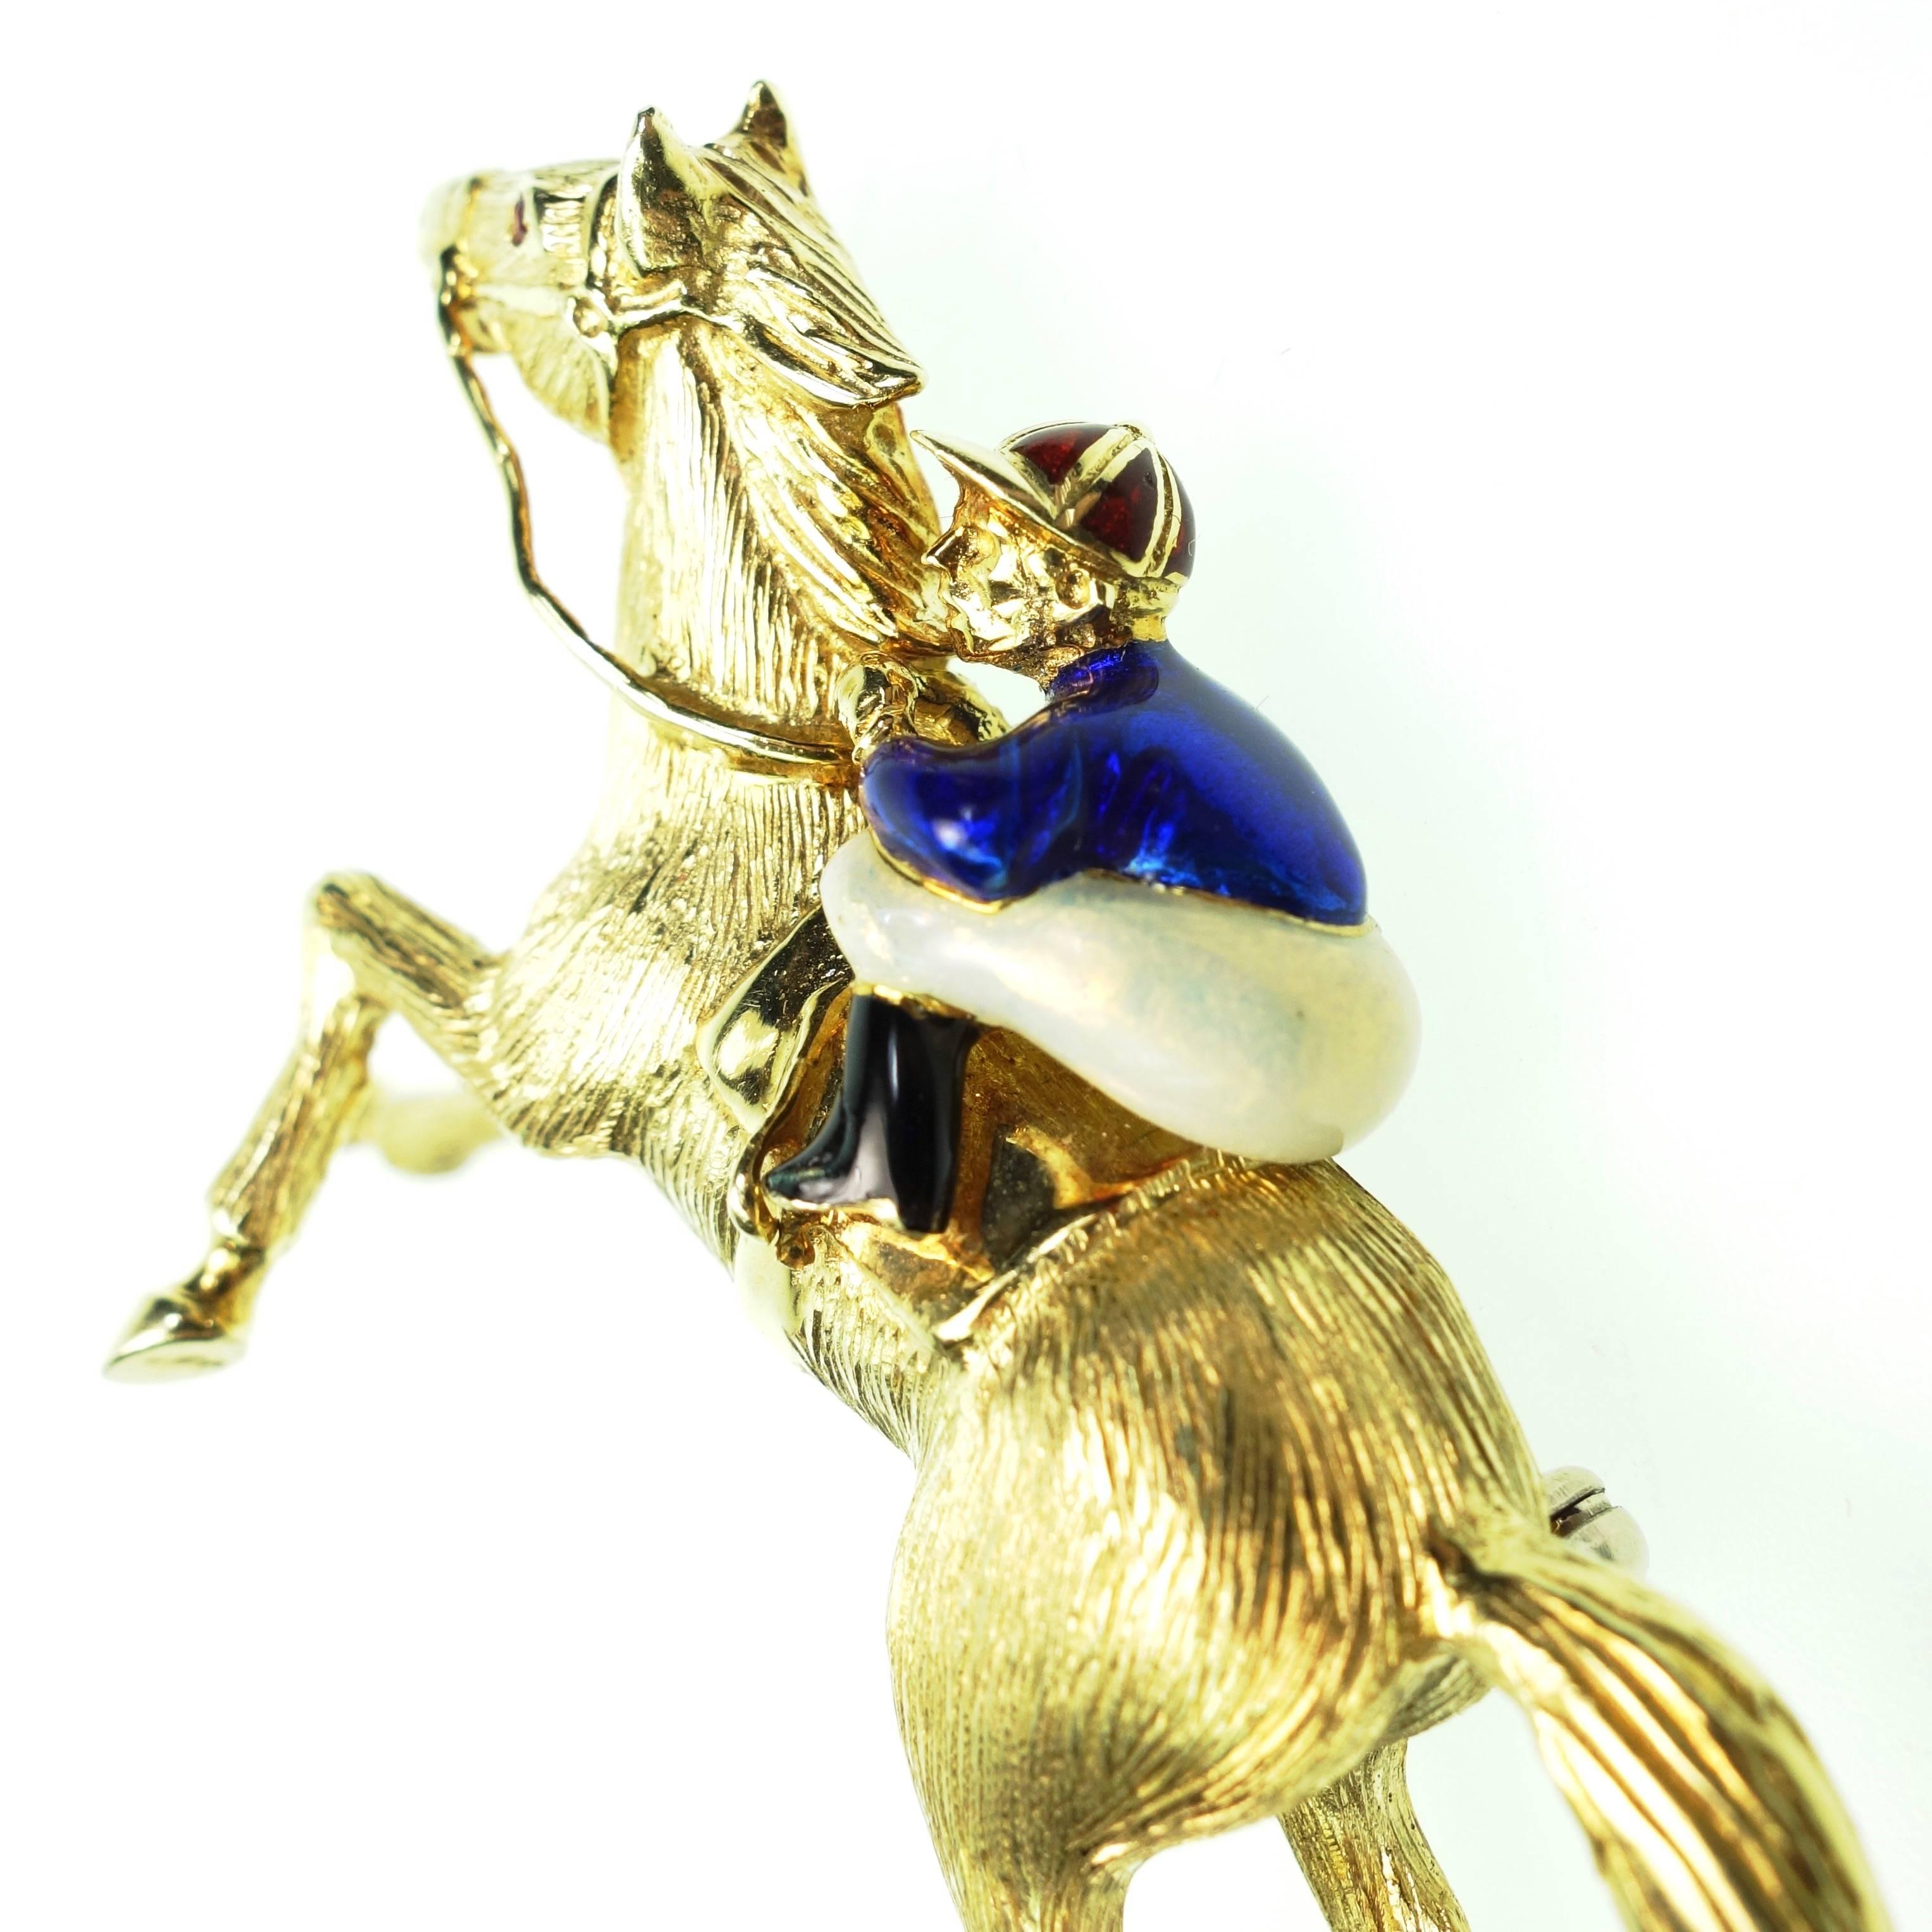 Fantastic 18K yellow gold race horse with jockey, accented with blue and white enamel and a ruby eye. Bright polish and textured finish.
Measurements:
2.25" L x 1.5" H x 0.75" D
Weight: 30.9 grams